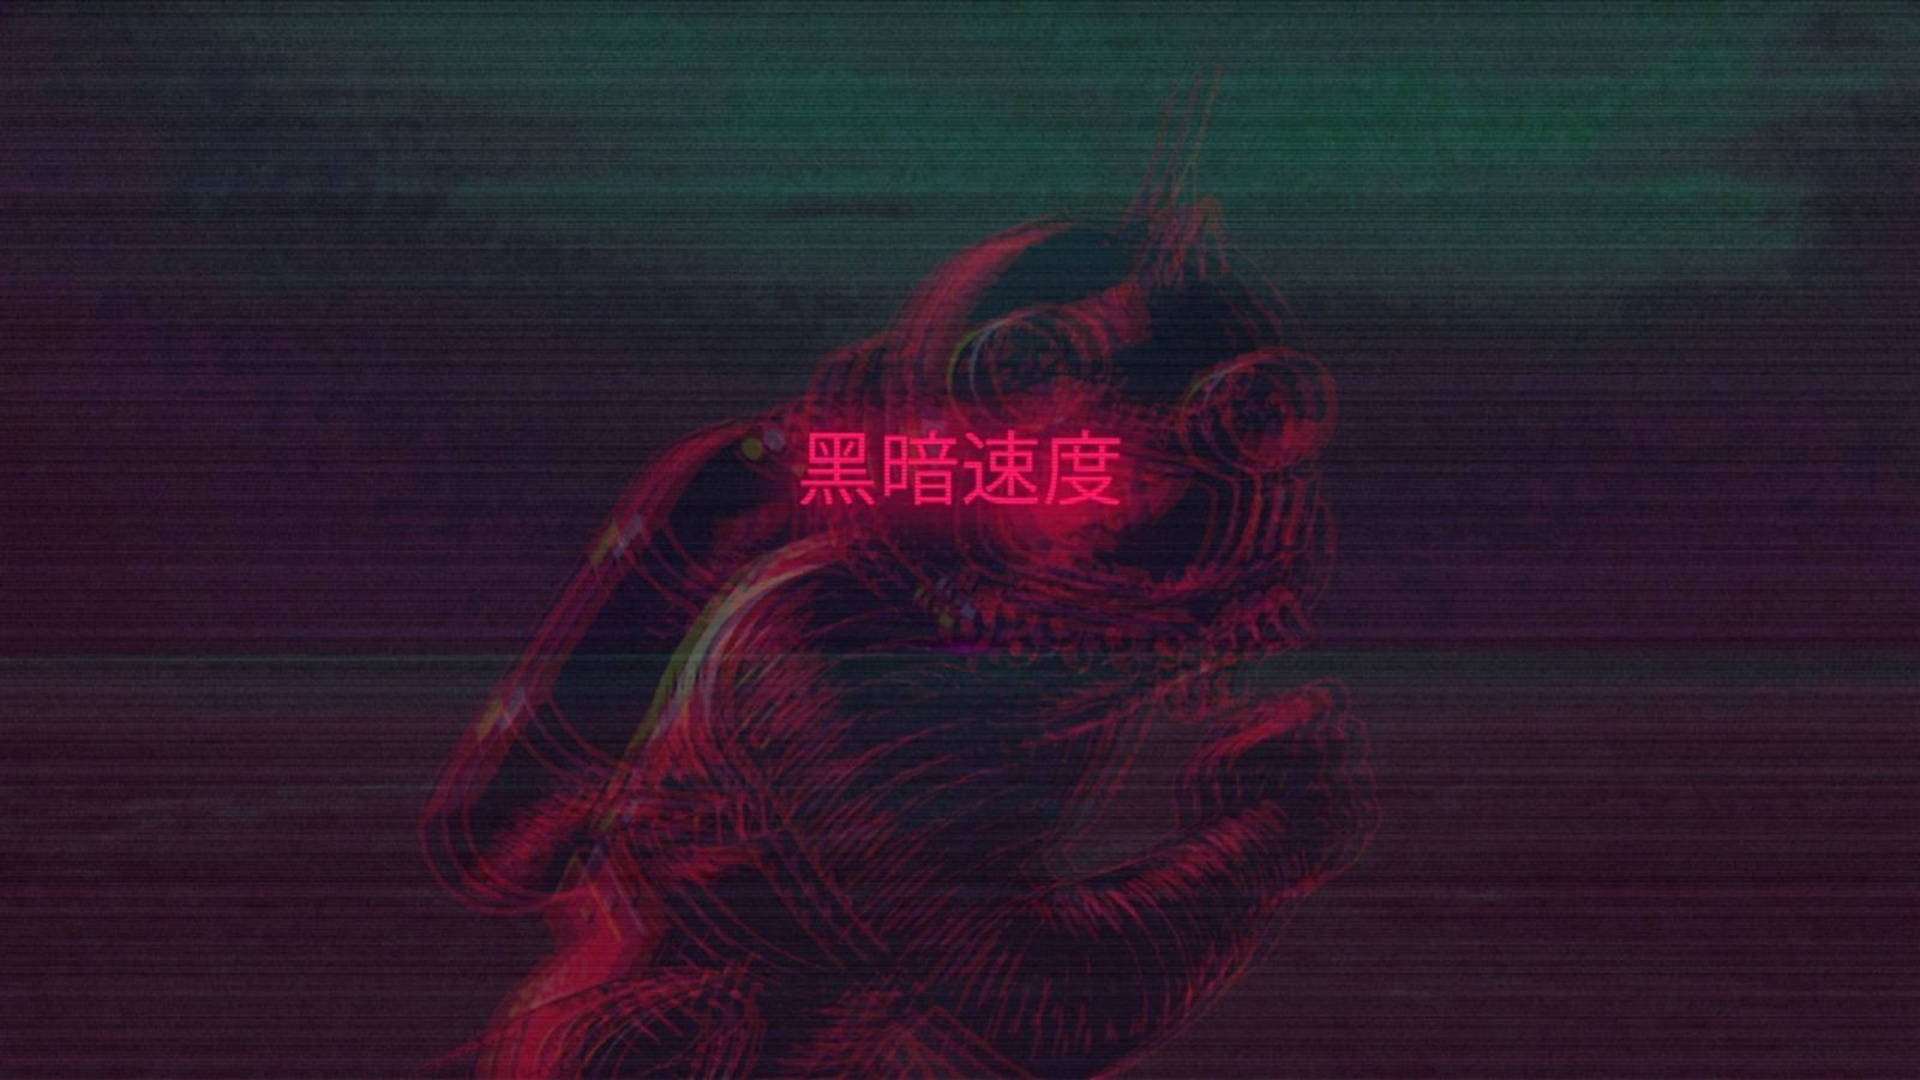 Trippy Dark Astronaut With Chinese Characters Wallpaper